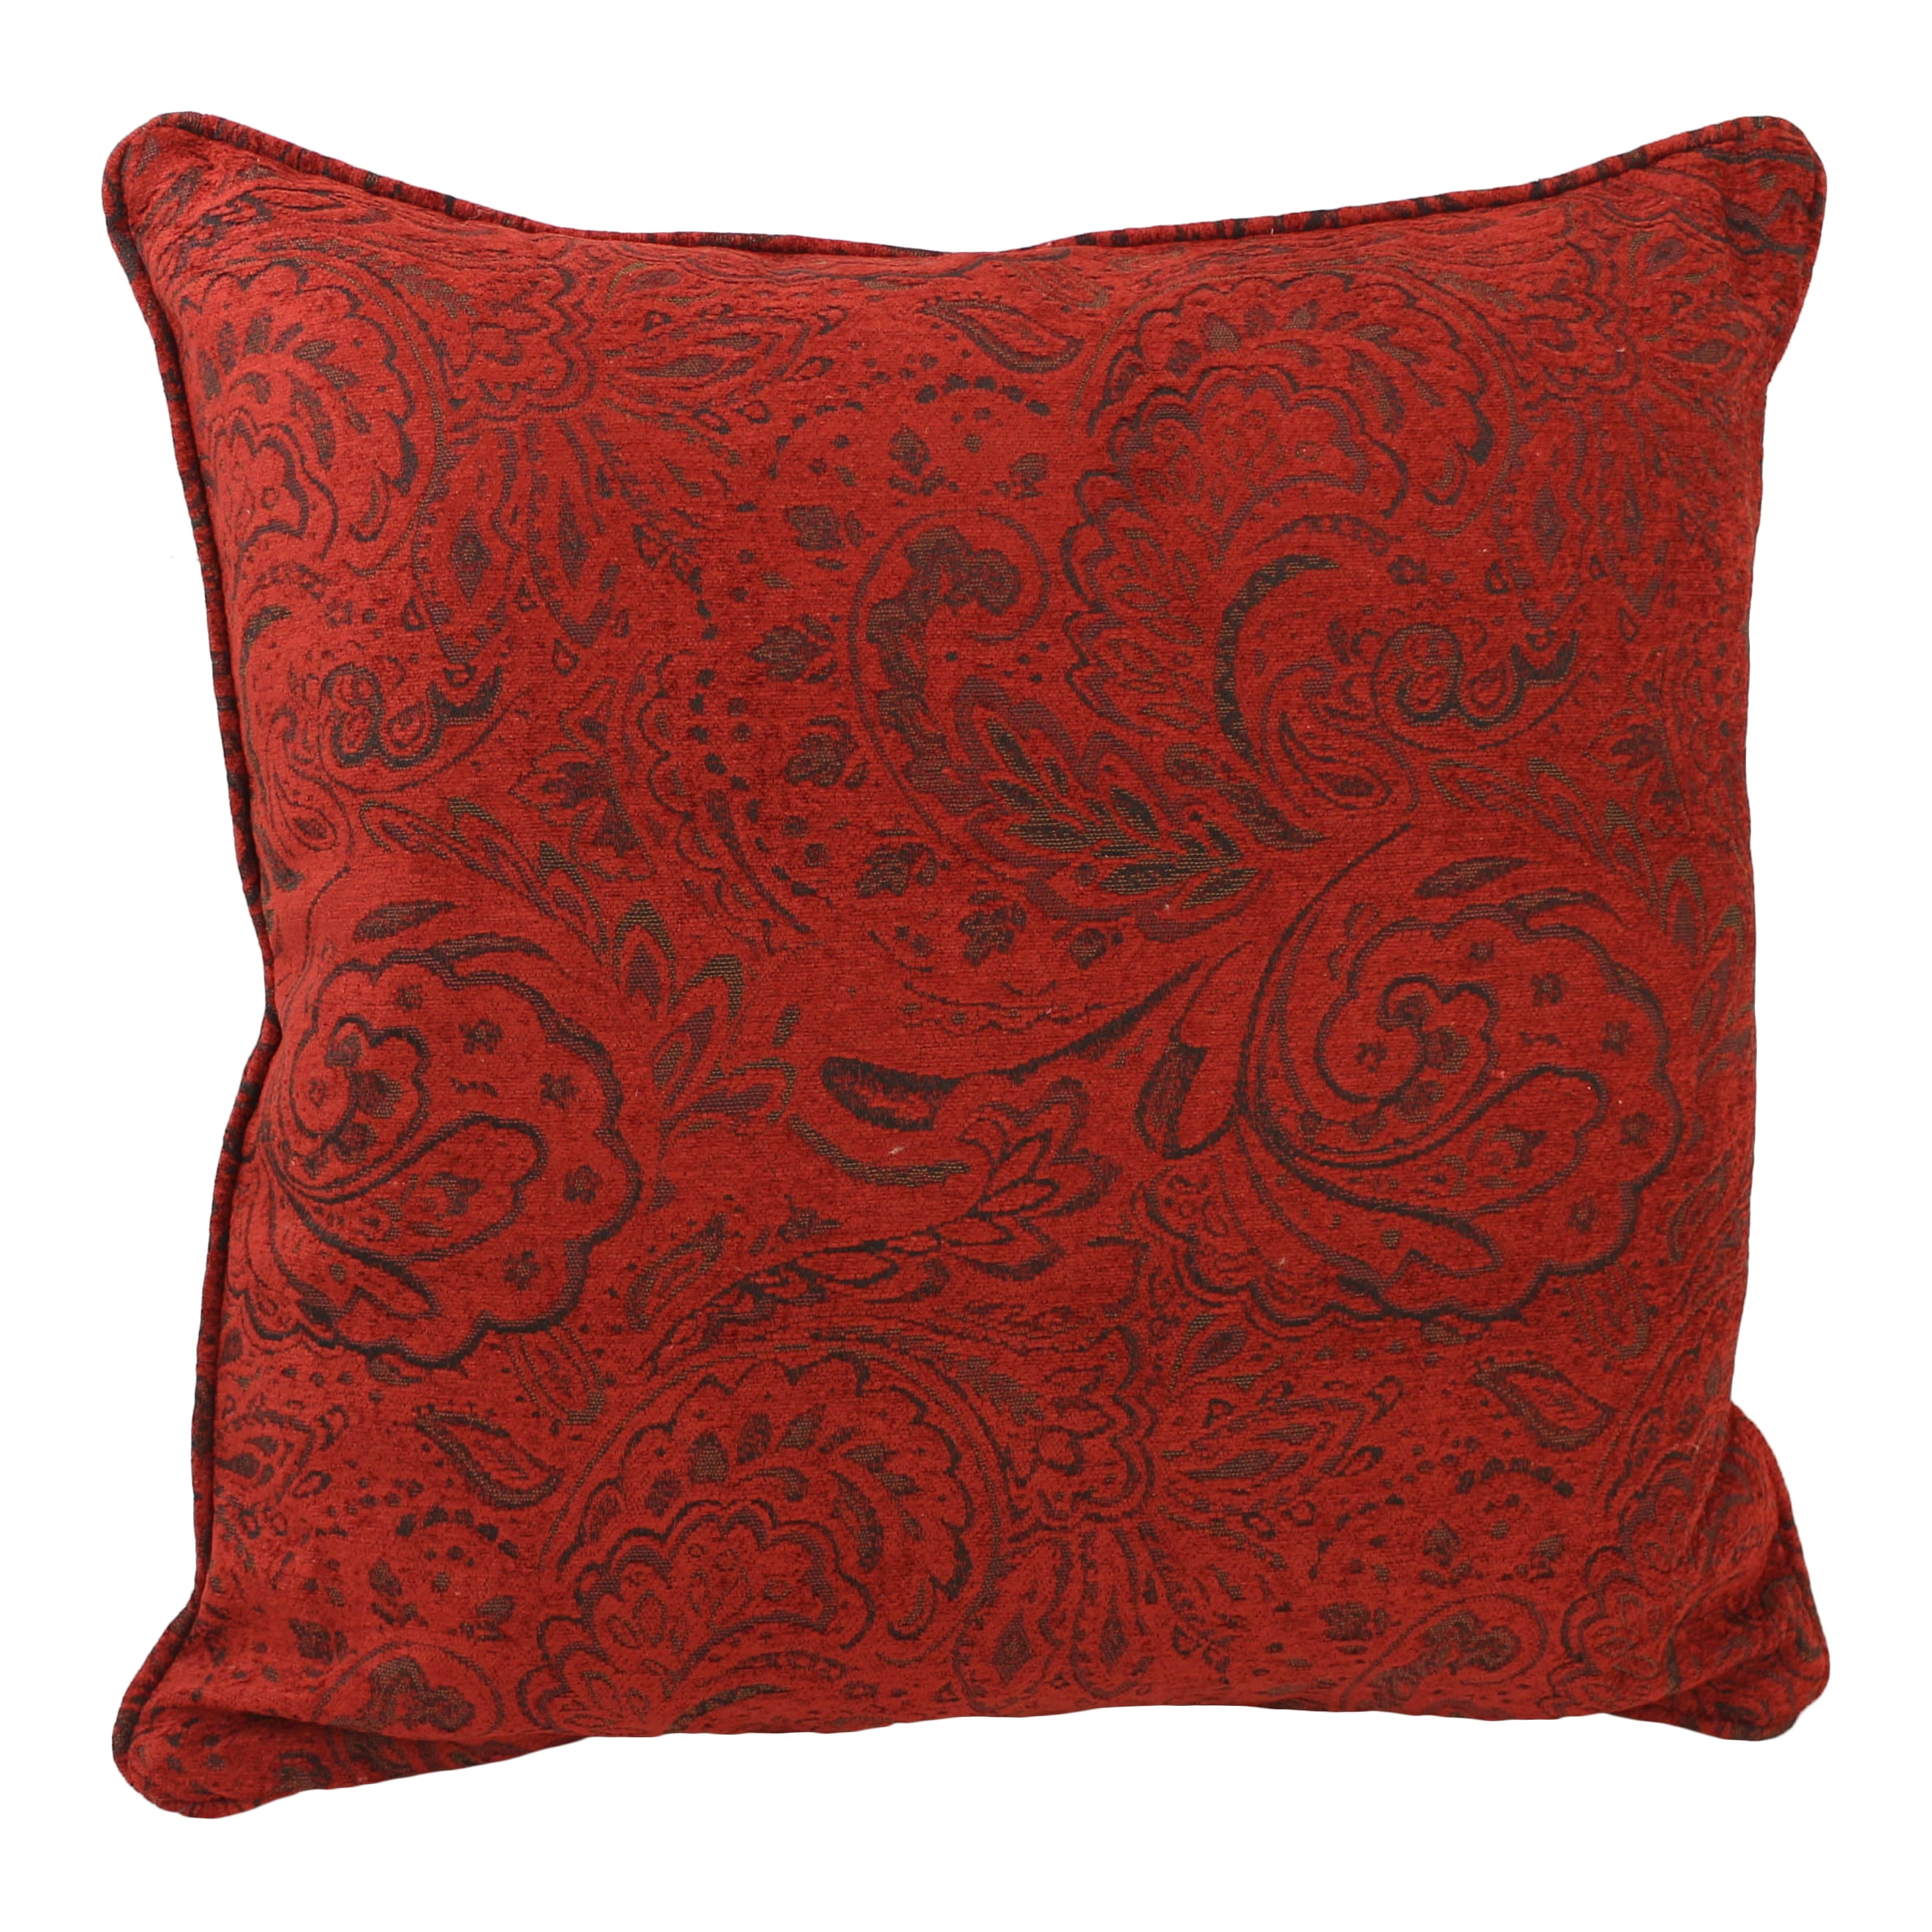 Picture of Blazing Needles 9813-CD-S1-JCH-CO-10 25 in. Double-Corded Patterned Tapestry Square Indoor Floor Pillow with Insert, Scrolled Floral Red